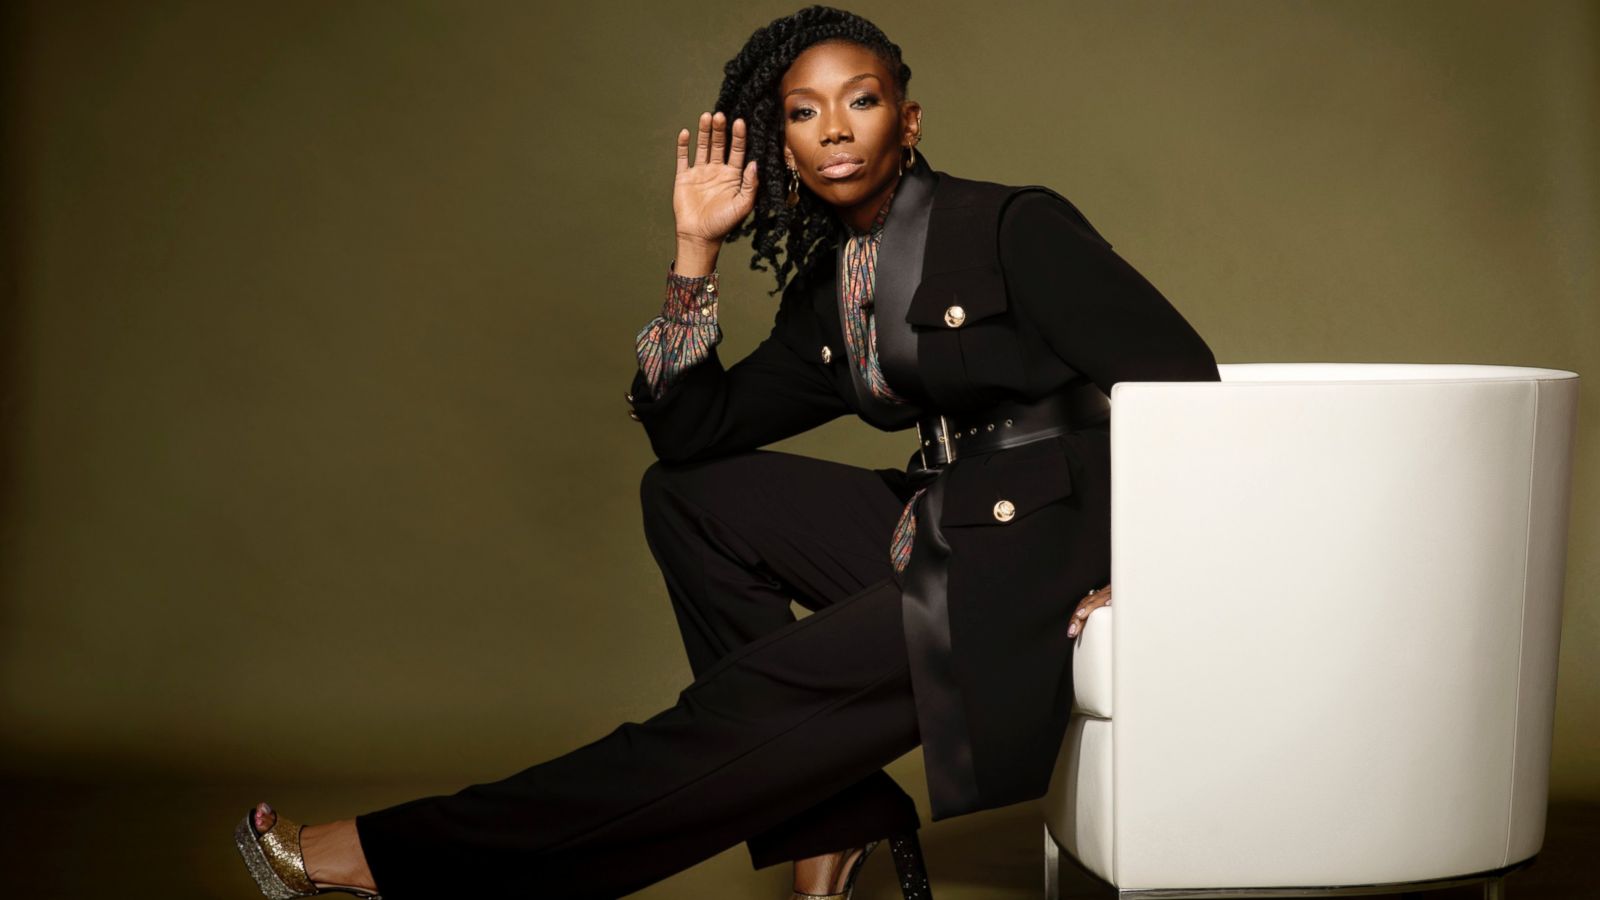 Singer Brandy is released from the hospital and resting